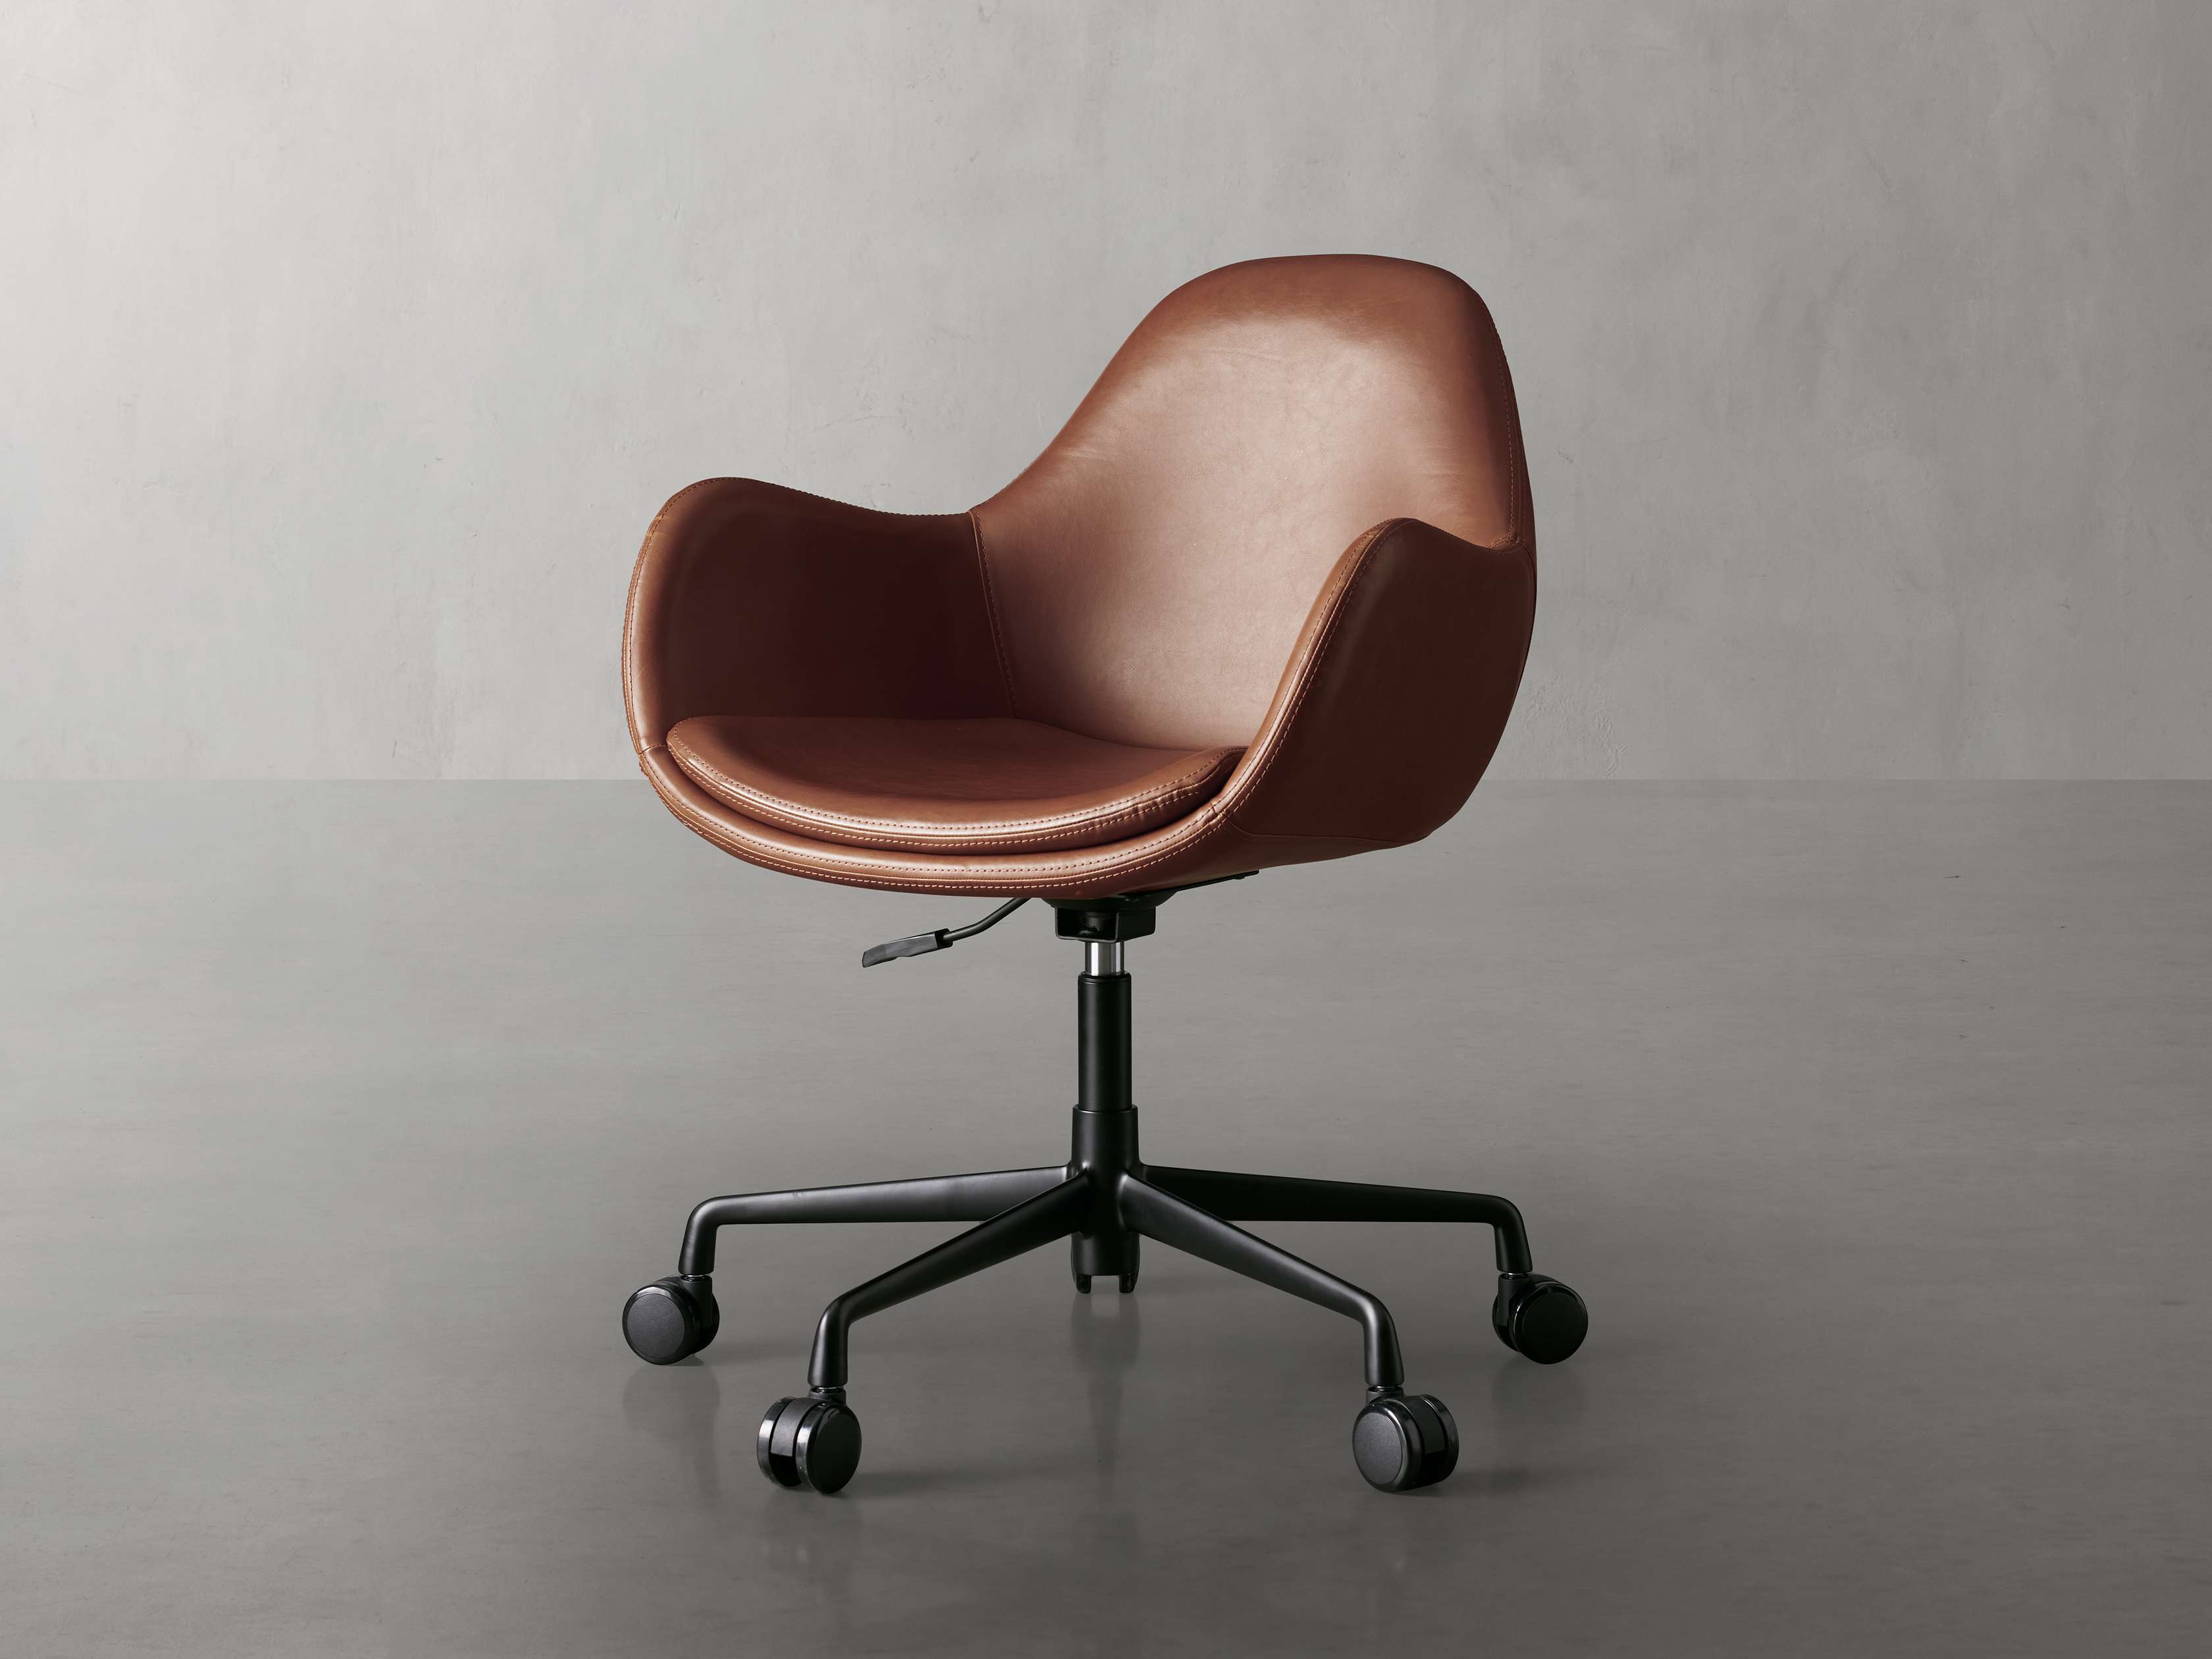 What To Look For In An Office Chair